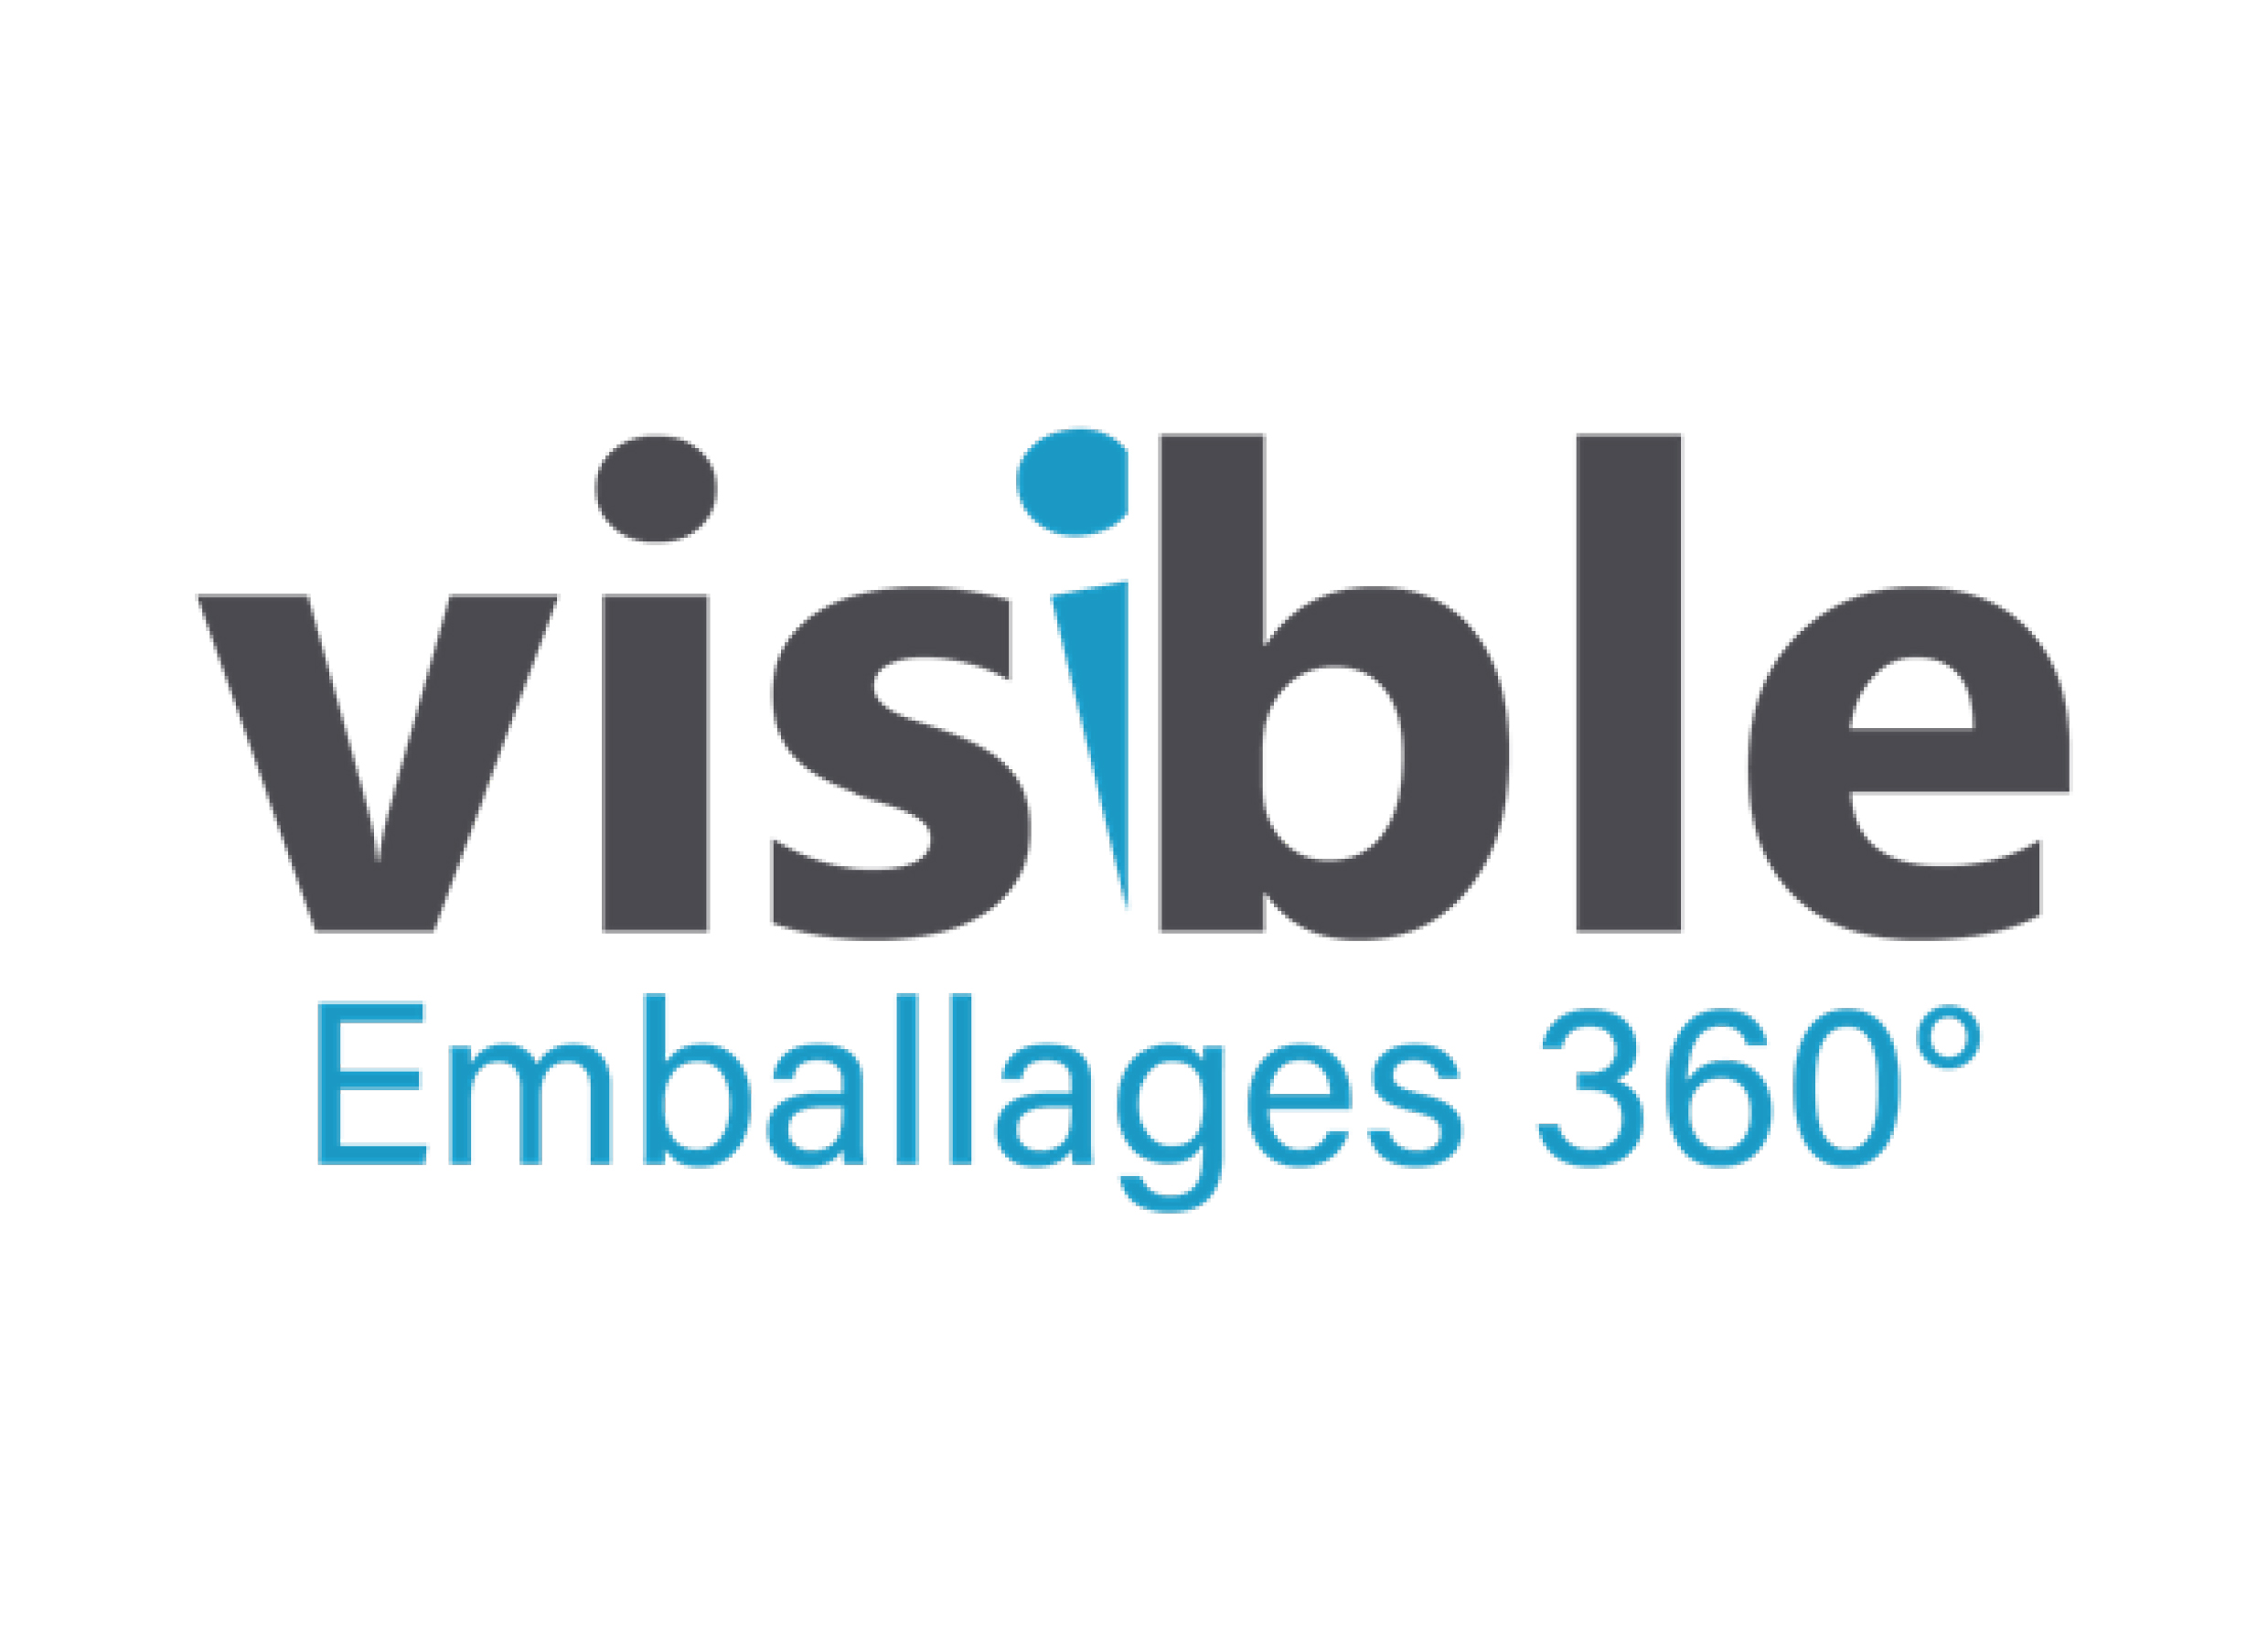 visible emballages 360